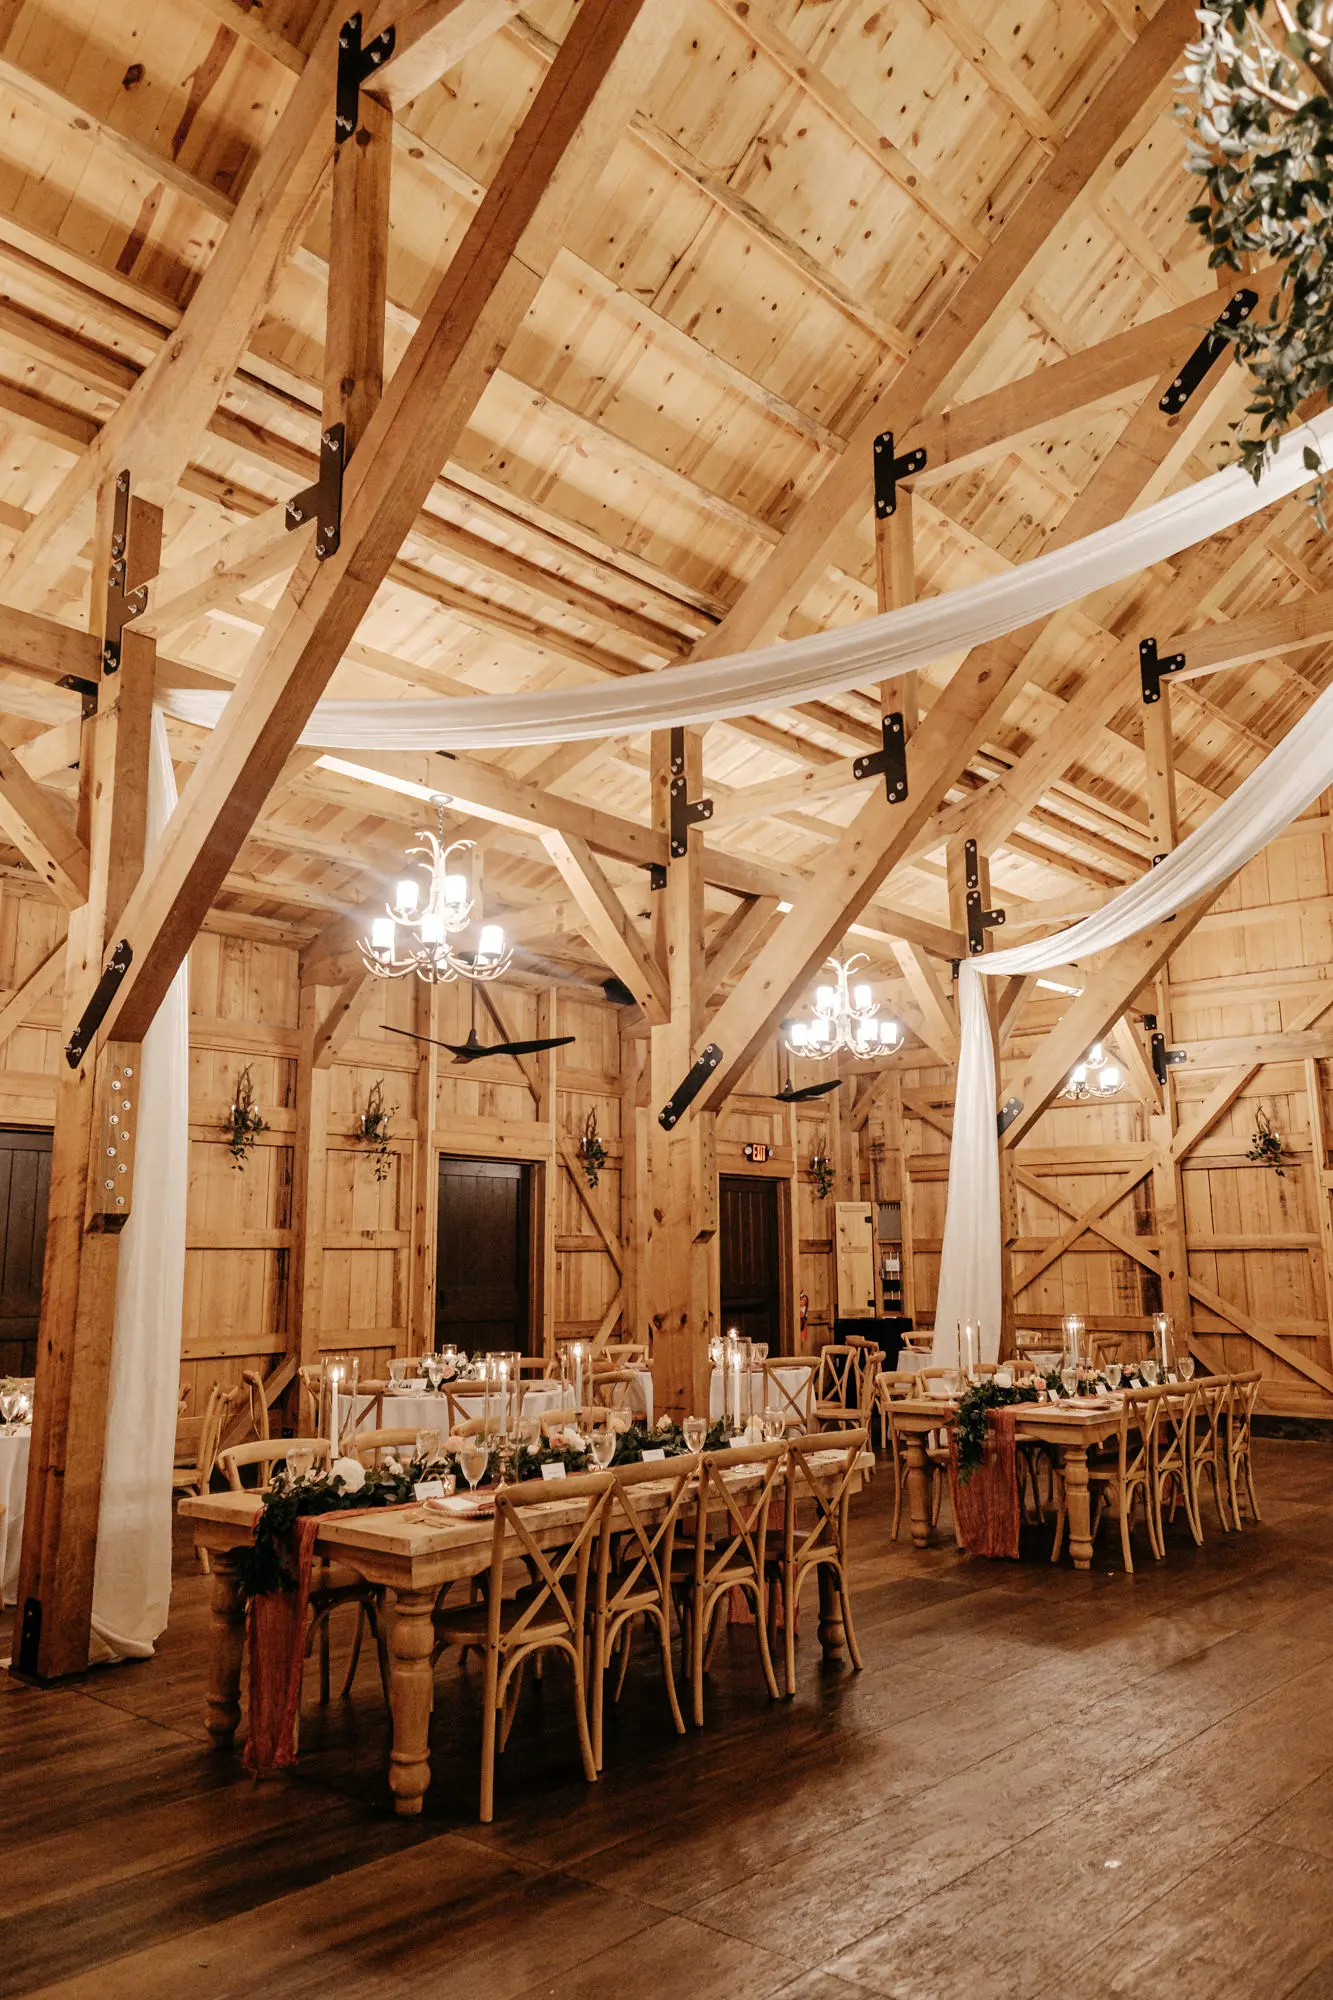 Rustic Garden Pink and Gold Barn Wedding Reception Long Feasting Table Decor Ideas | White Drapery Inspiration | Tampa Bay Rustic Venue Mision Lago Estate